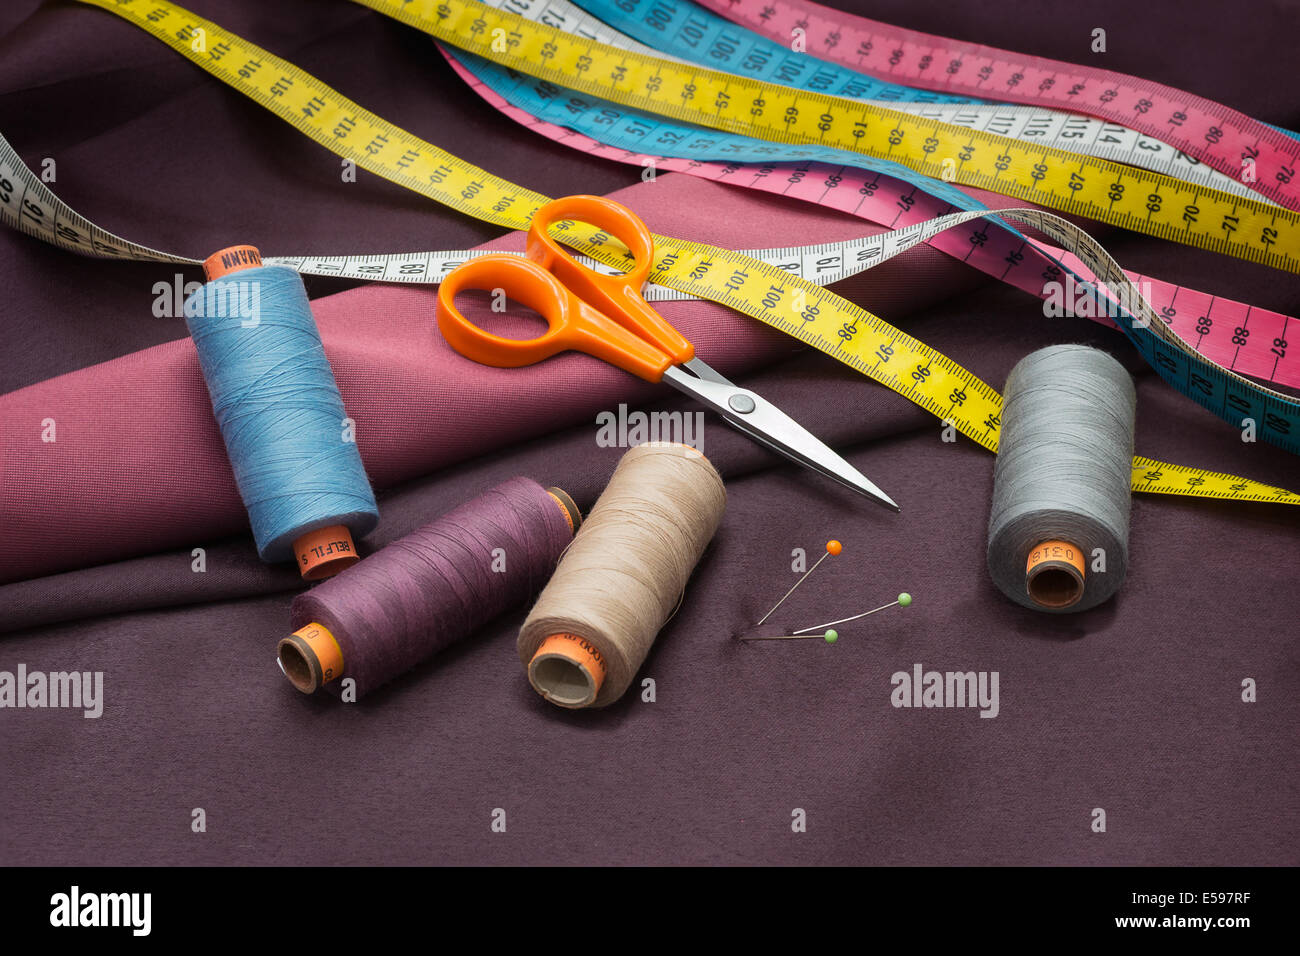 Tailors tools - thread spools, pin, scissors and measuring tape on red fabric. Stock Photo